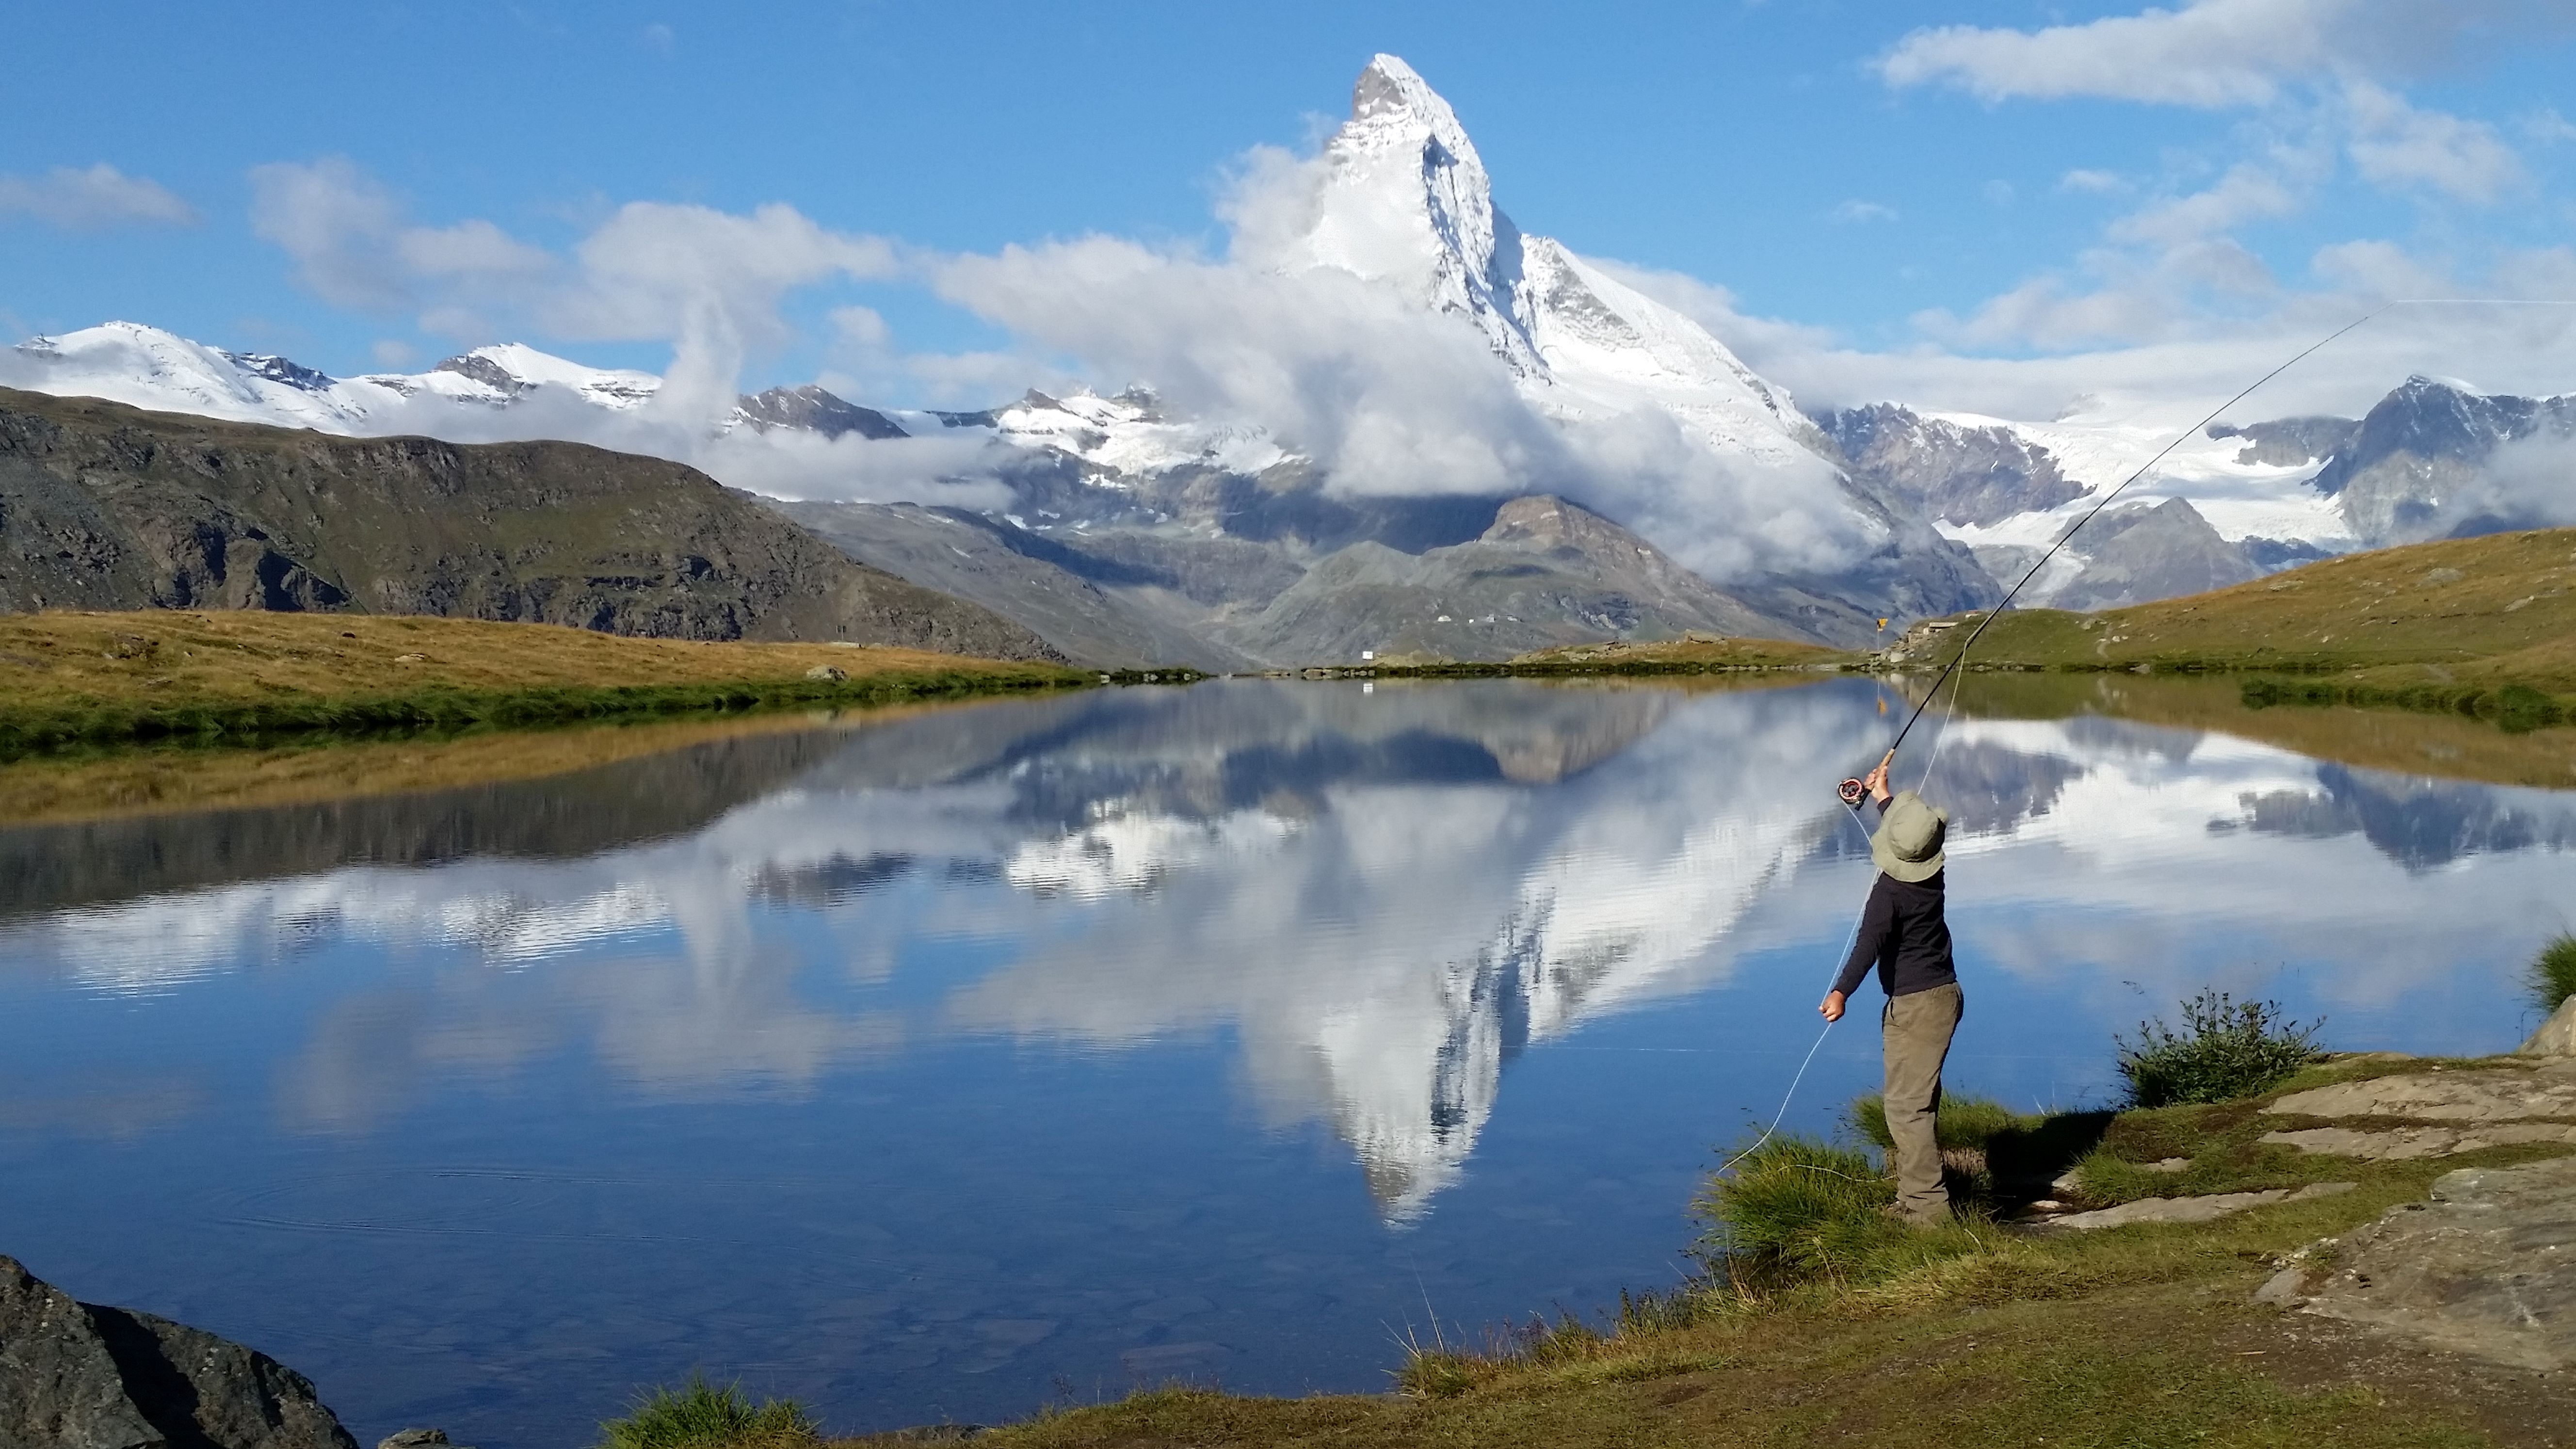 Fly Fishing in Switzerland, casting into the Matterhorn refection